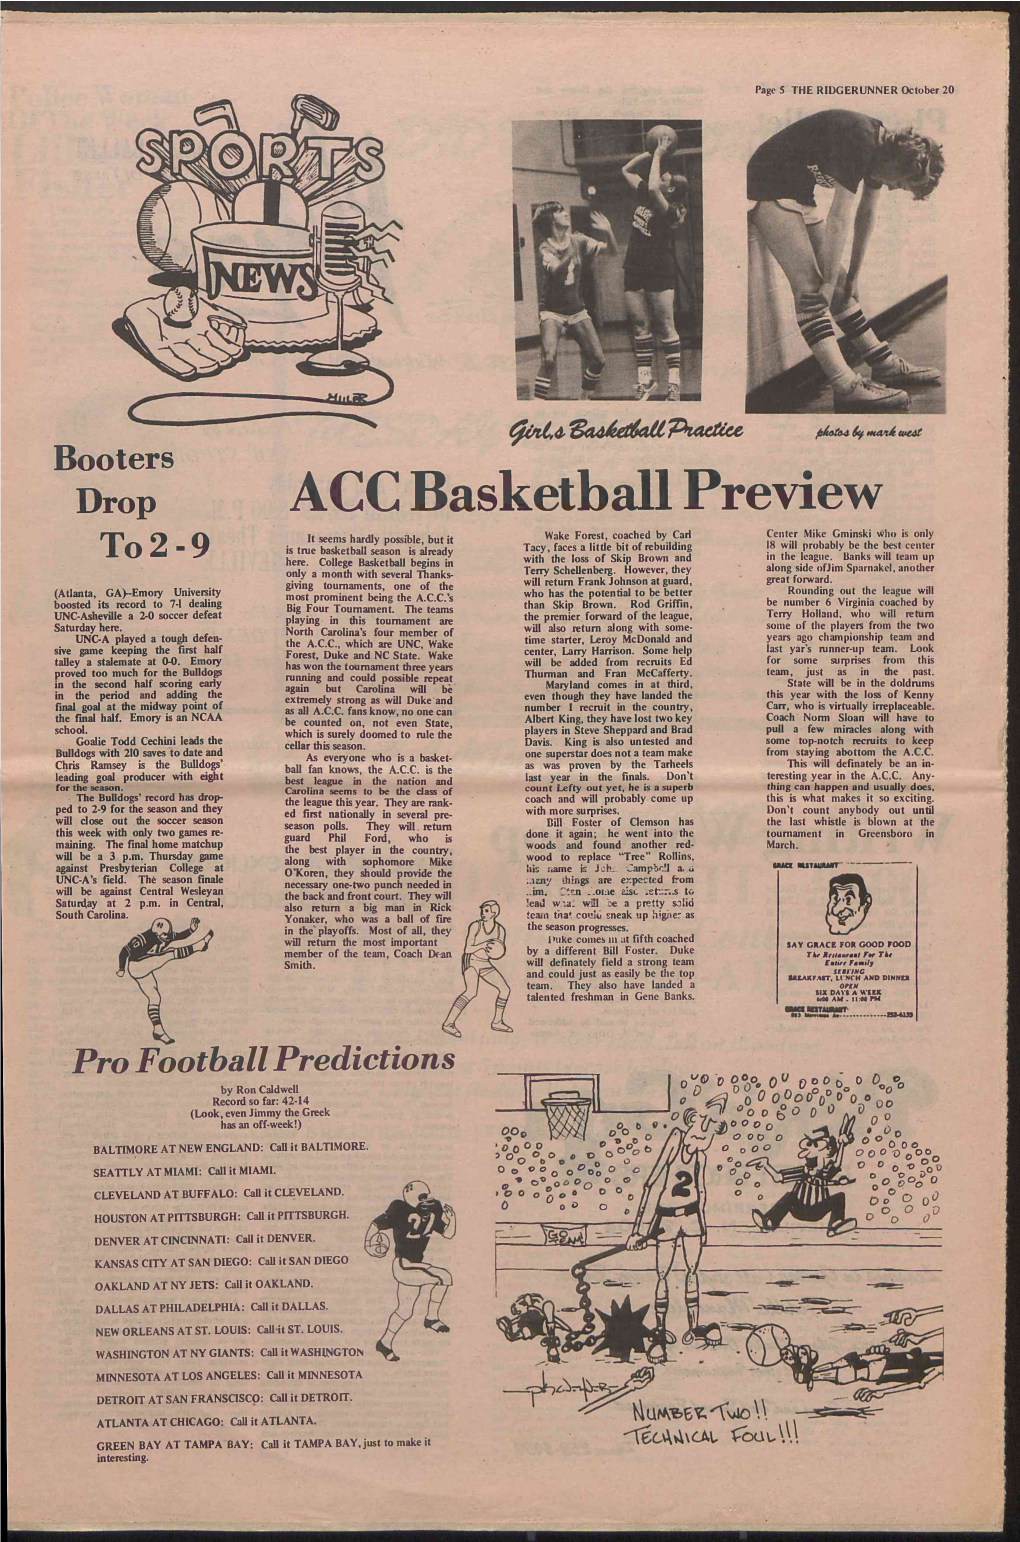 ACC Basketball Preview